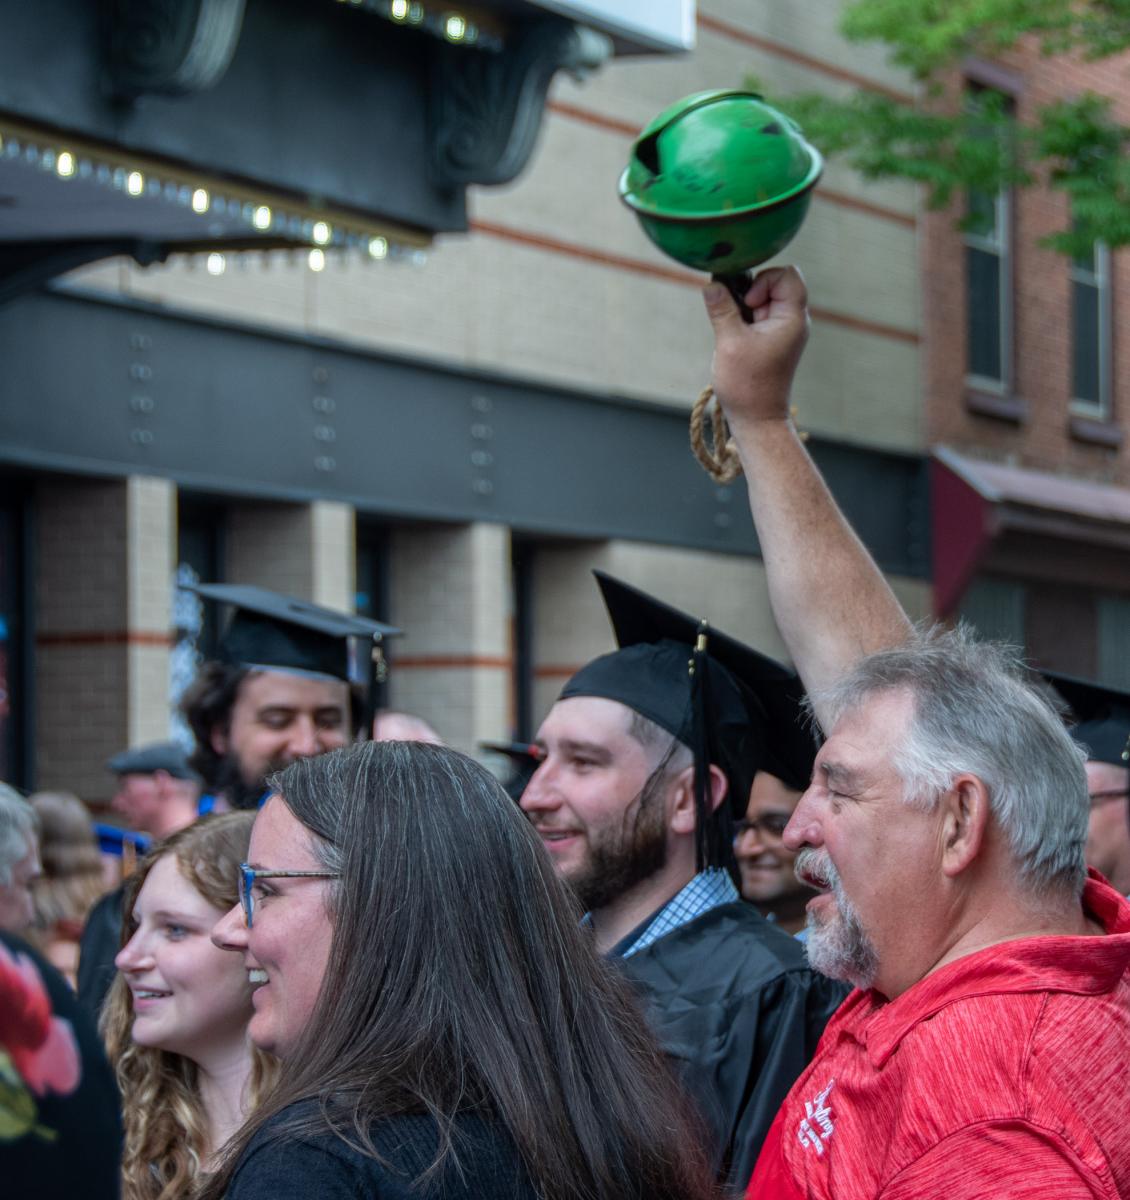 Inside, this hefty bell helped cheer on this family’s favorite grad. Outdoors, it was used to help that new alum find them in the post-commencement crowd.